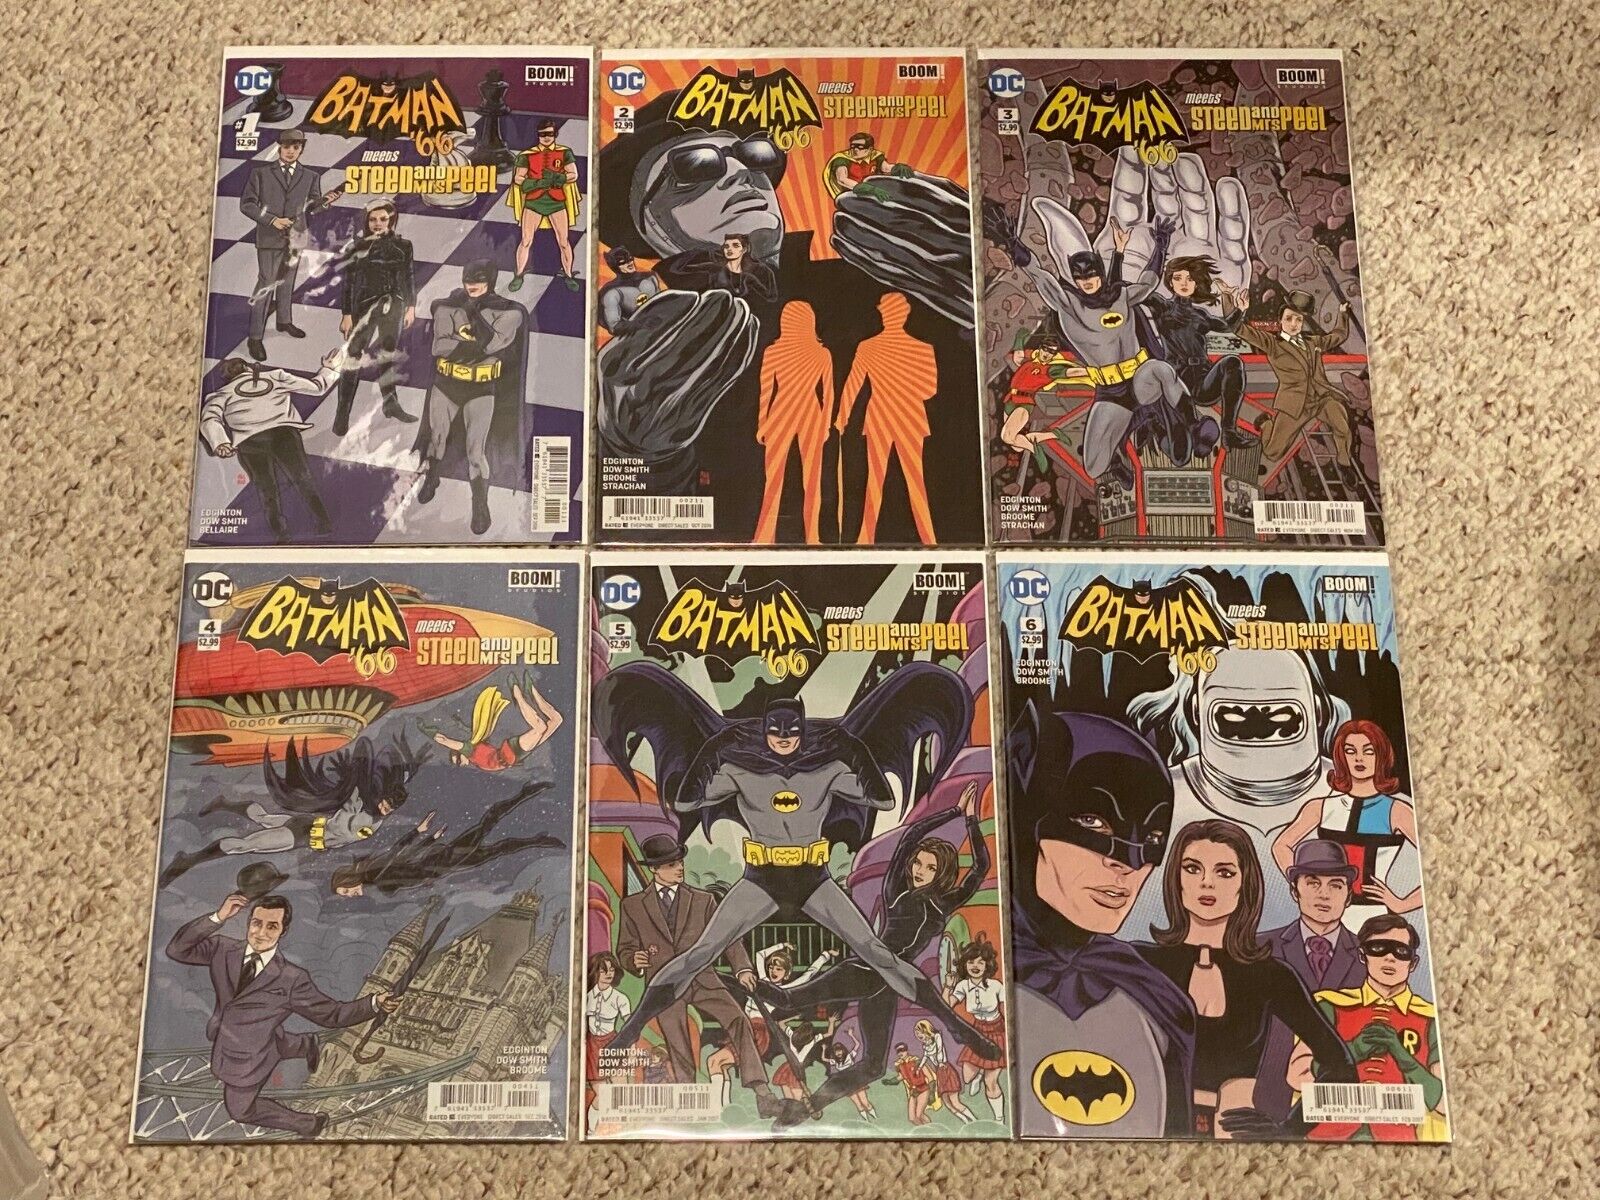 BATMAN \'66 MEETS STEED AND MRS PEEL #1-6 WITH COVERS BY MICHAEL ALLRED